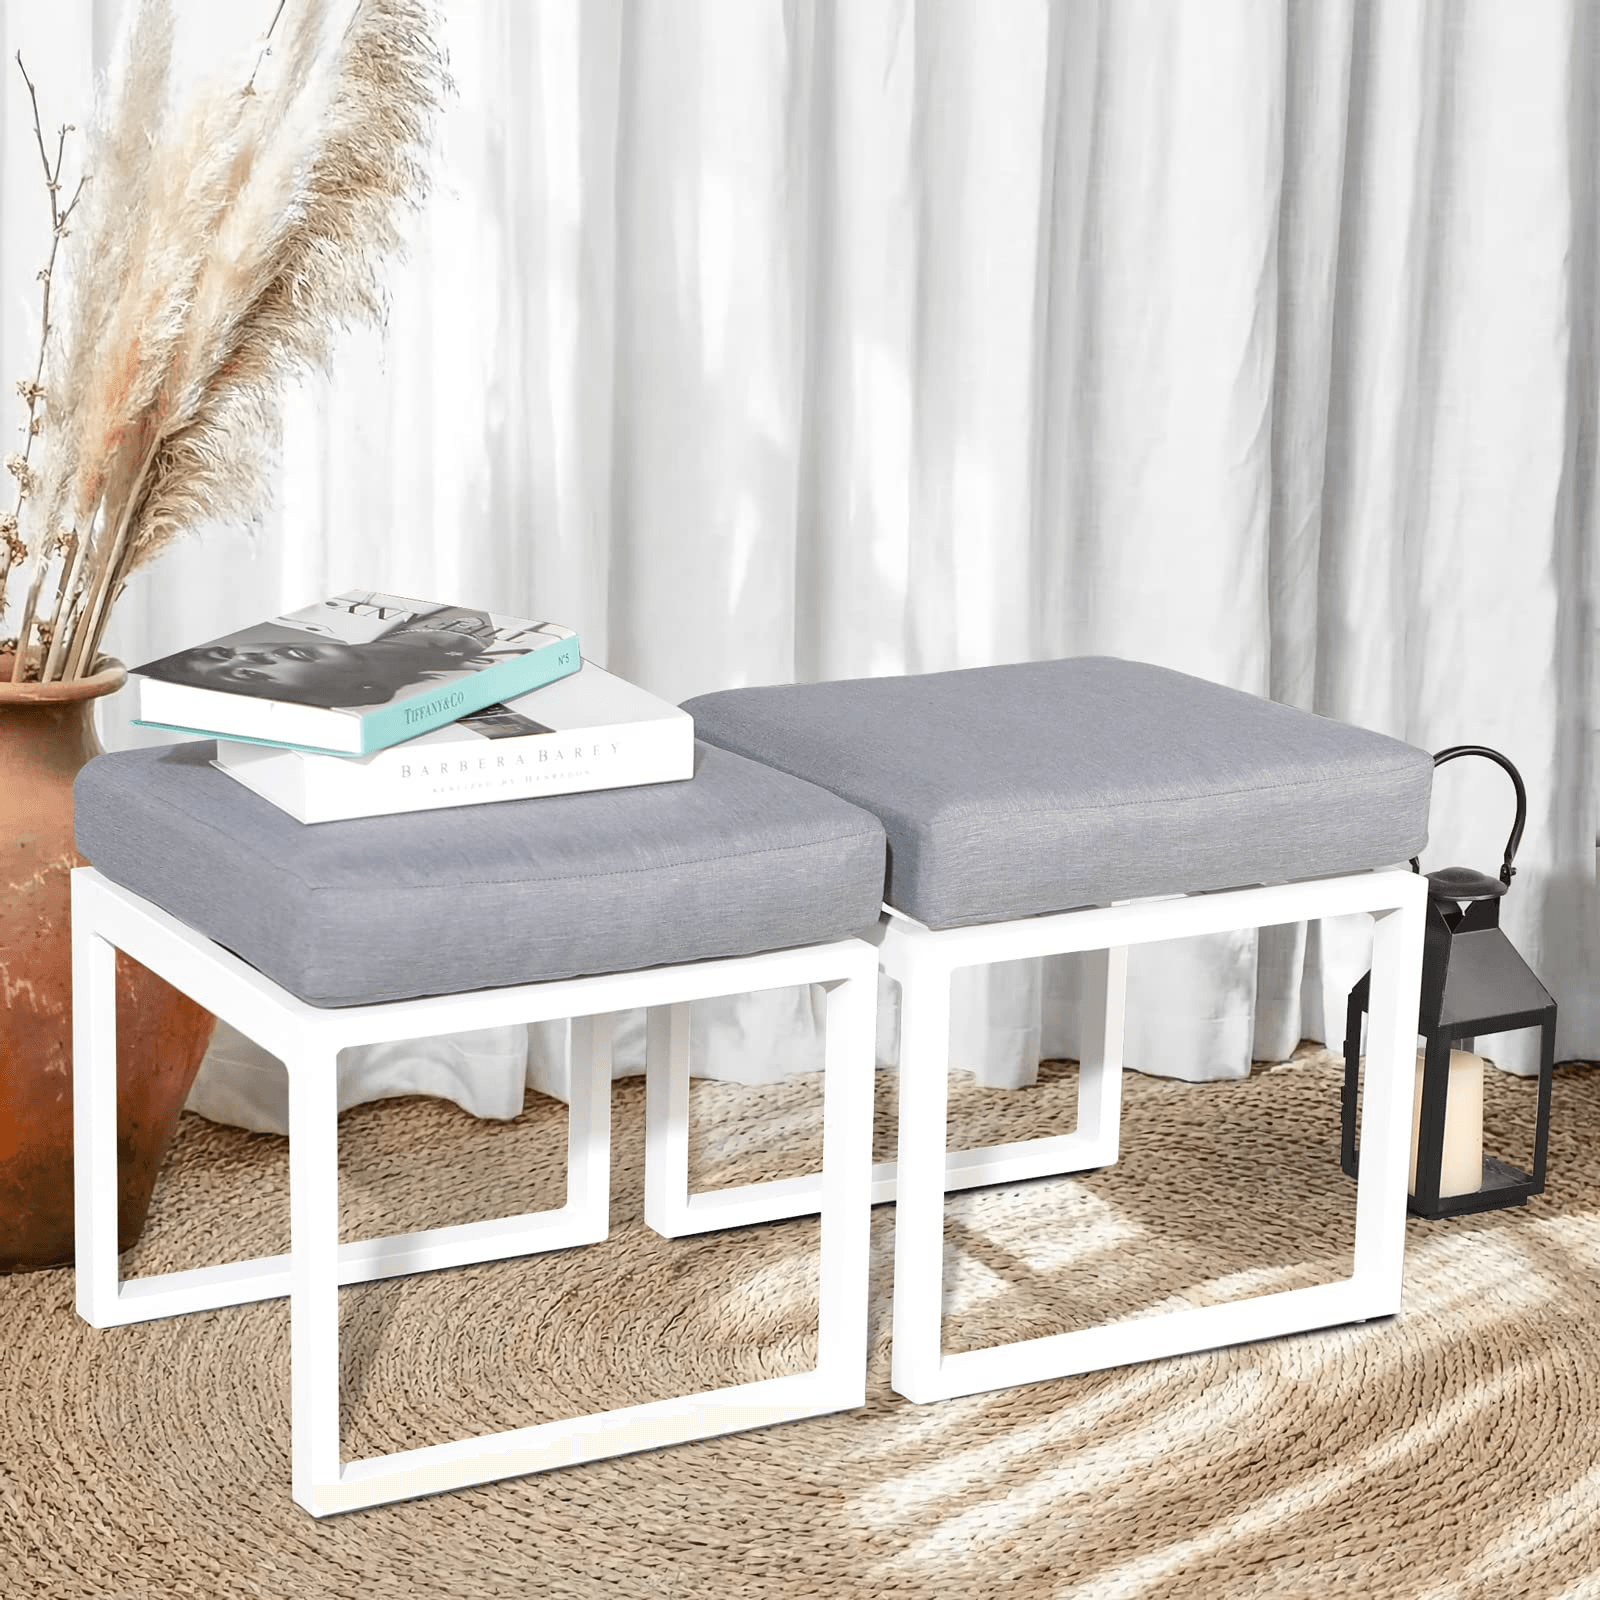 2pcs Outdoor Patio Ottomans White Aluminum Footstool with Grey Cushions | Orange-Casual